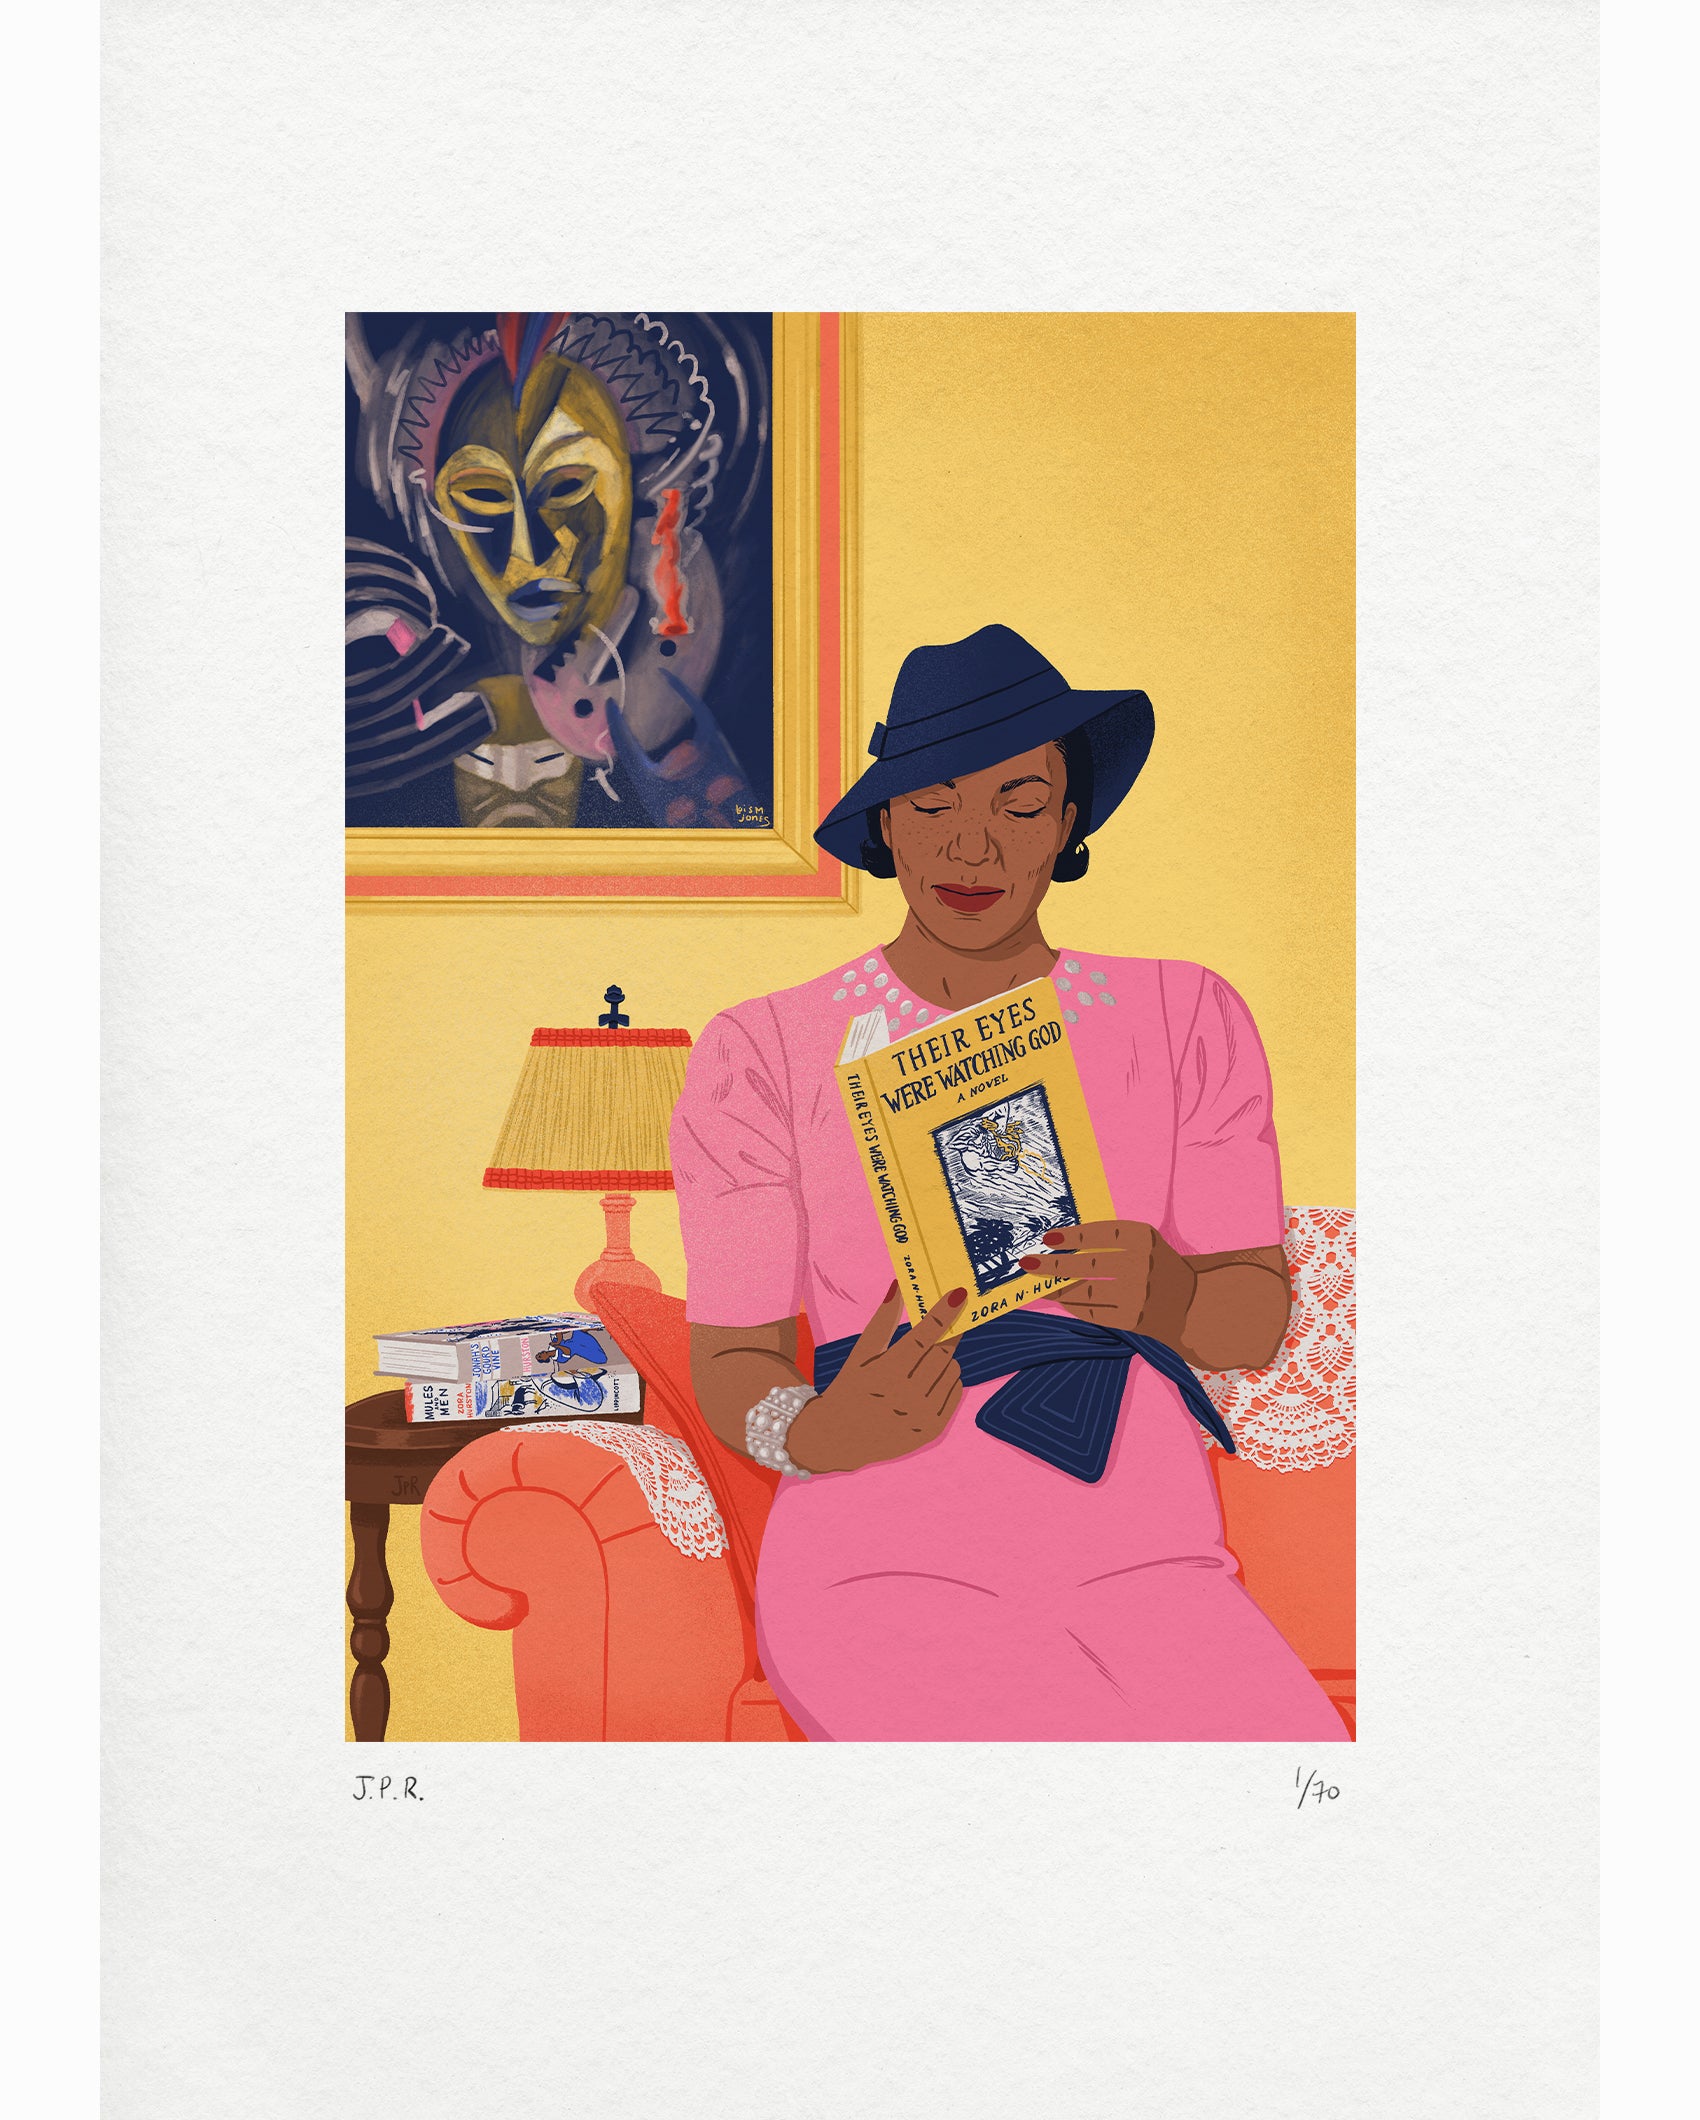 Illustrated portrait of Zora Neale Hurston in her living room, reading her book. Behind here is a painting by Lois Mailou Jones, another important Black woman of the Harlem Renaissance.